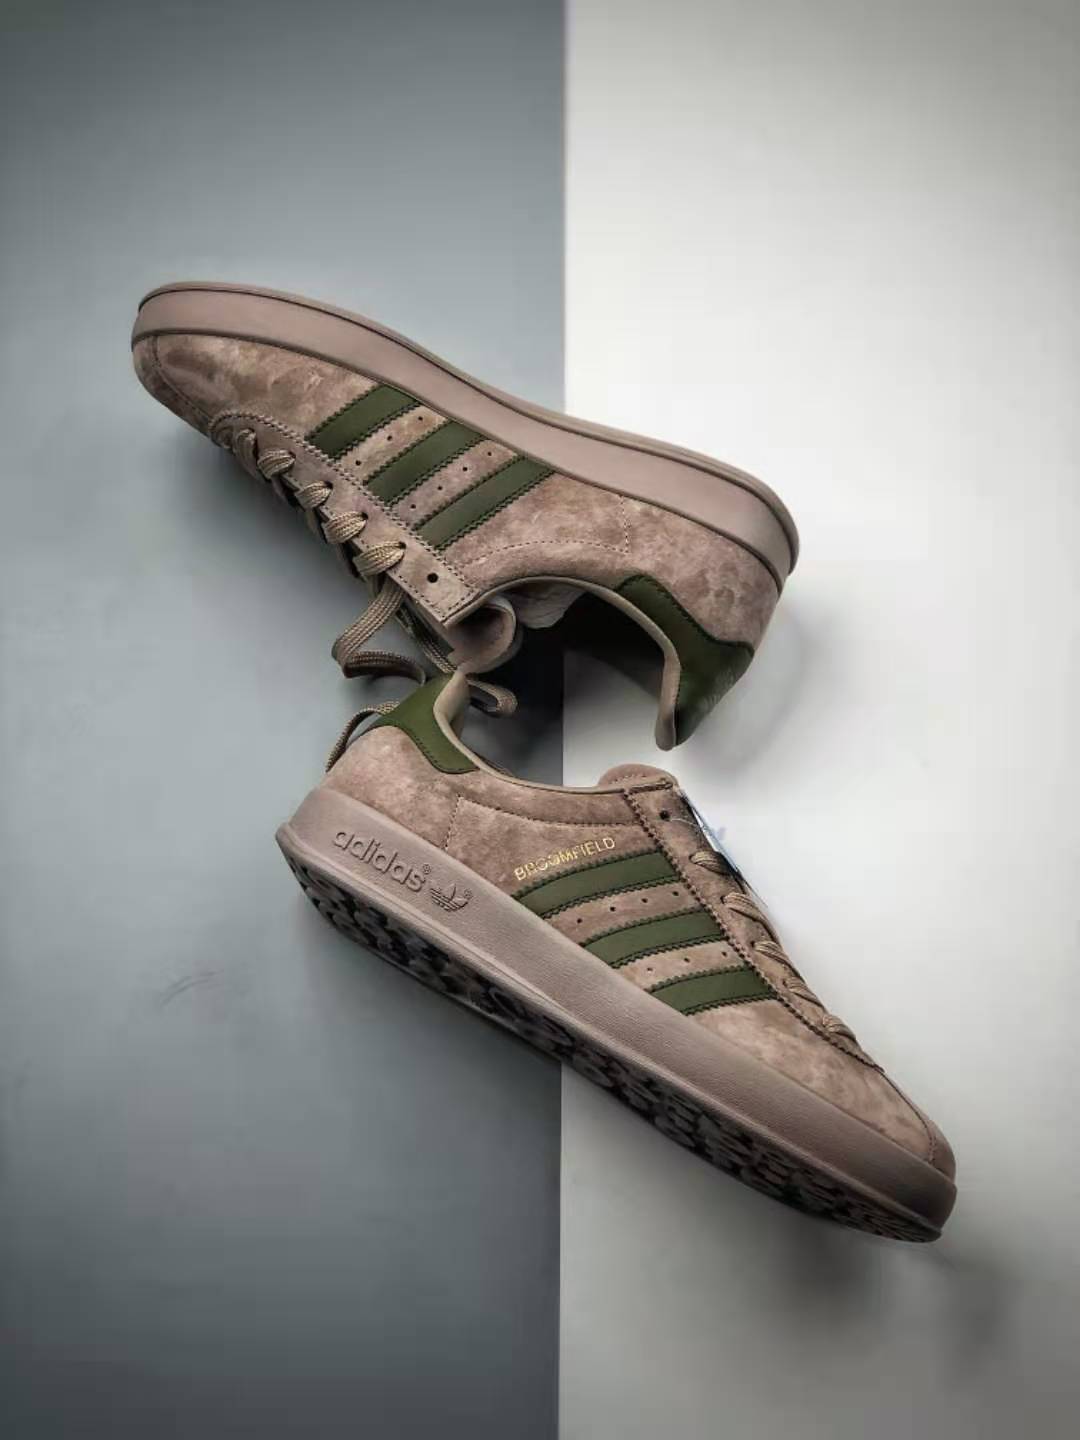 Adidas Originals Broomfield Brown Green Gold Metallic EE5716 - Unique Style and Superior Quality